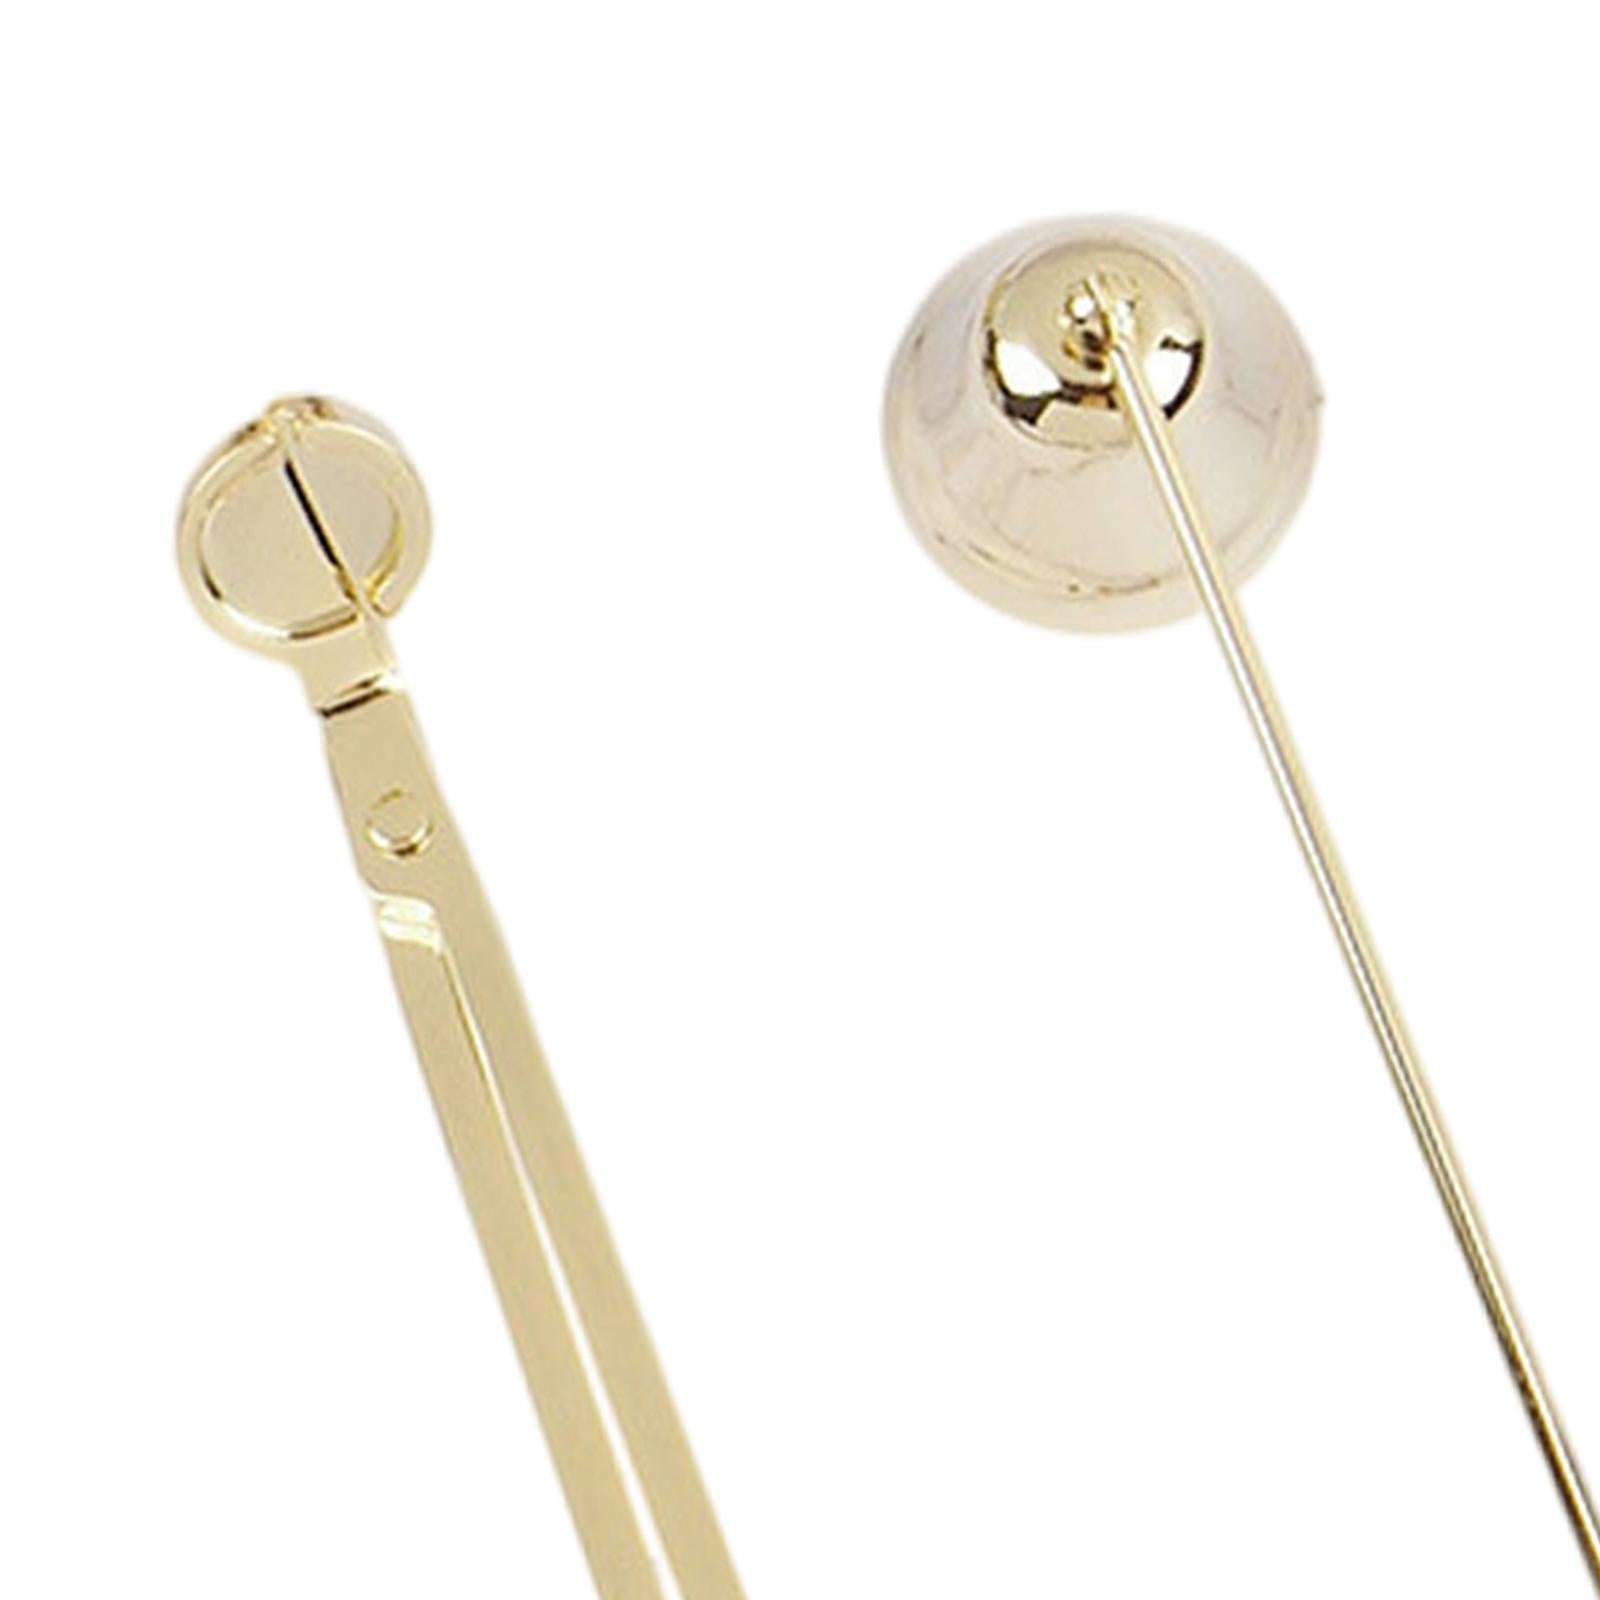 2x Candle Snuffer Candle Wick Trimmer Accessory Set Candle Cutter Safely Gold